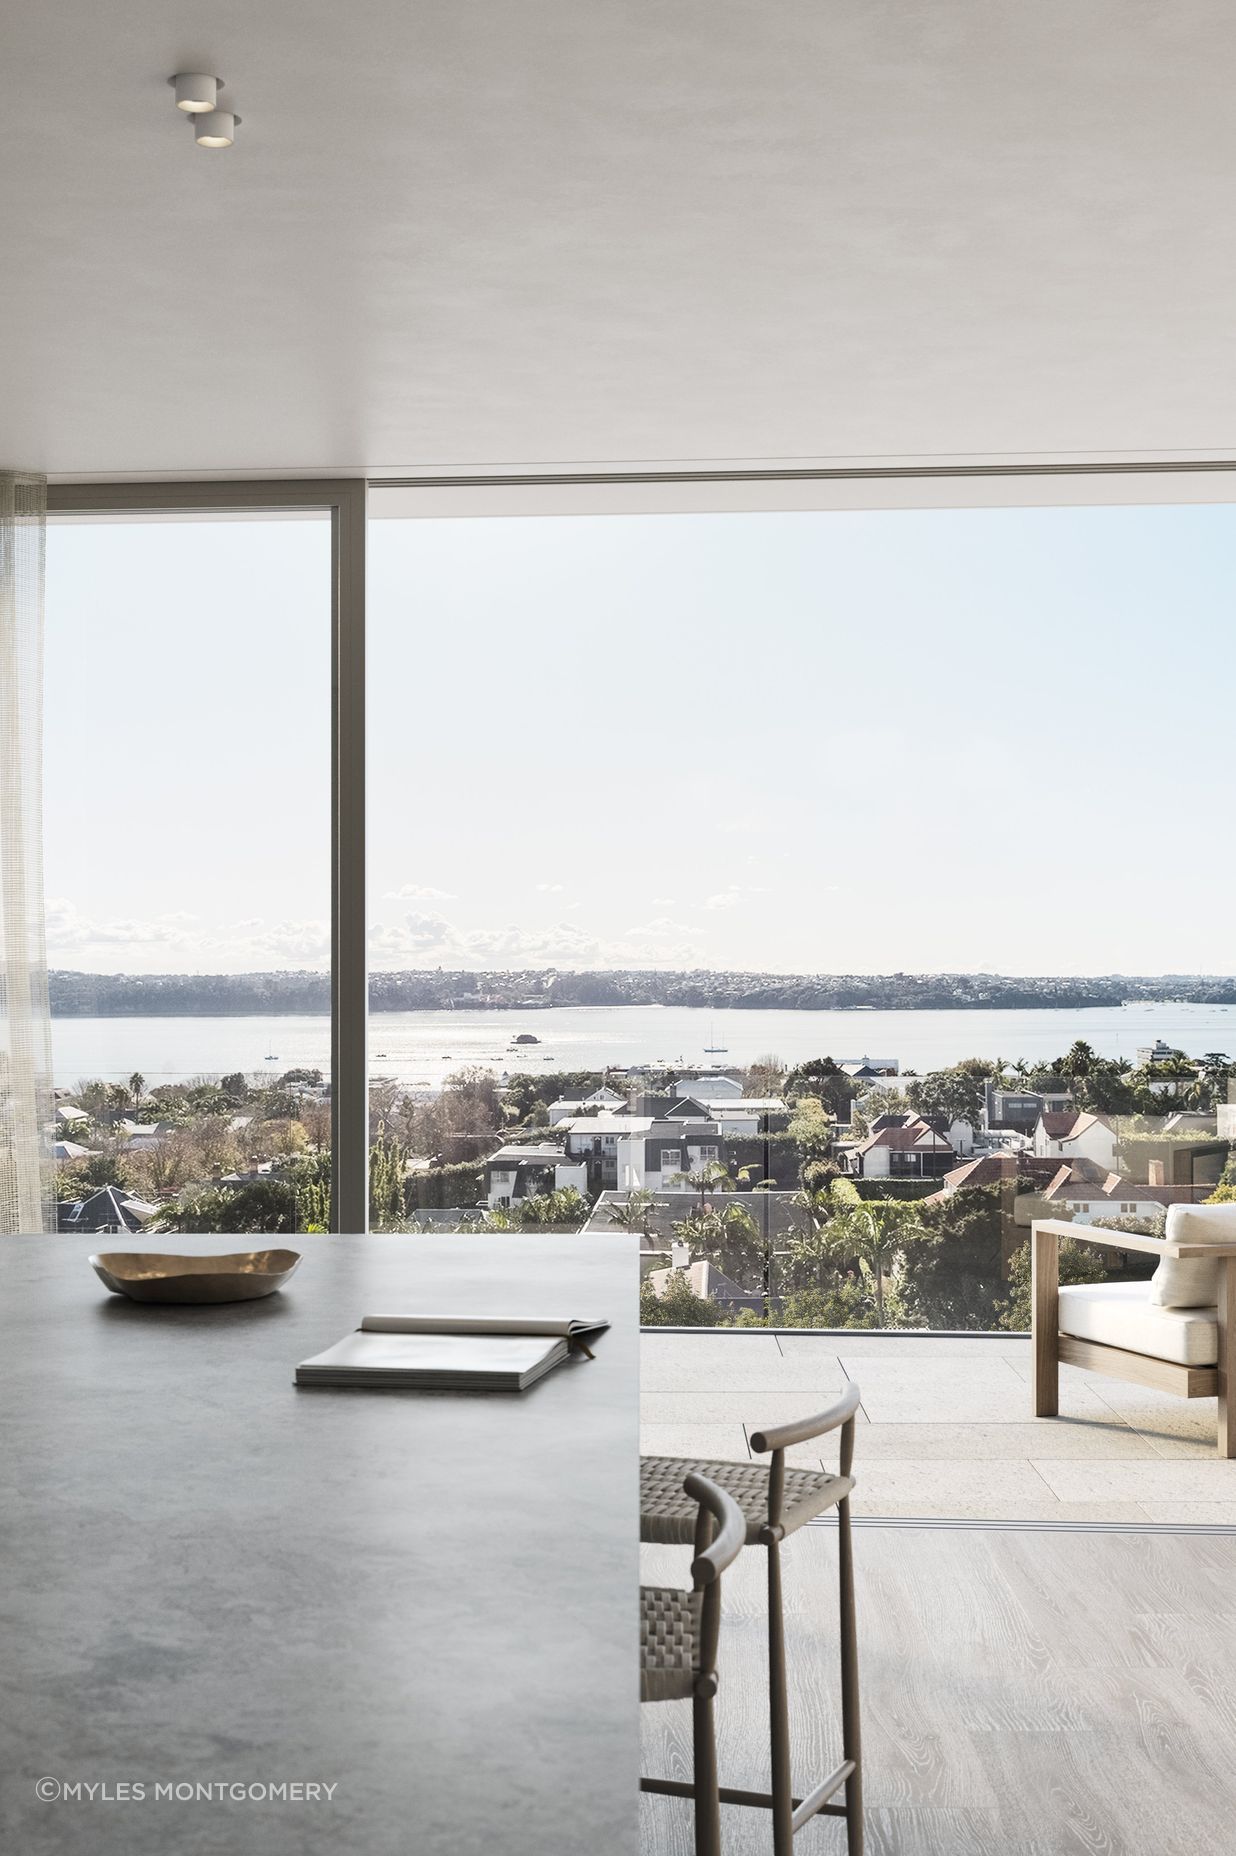 North-facing living areas are directed towards the captivating harbour views.